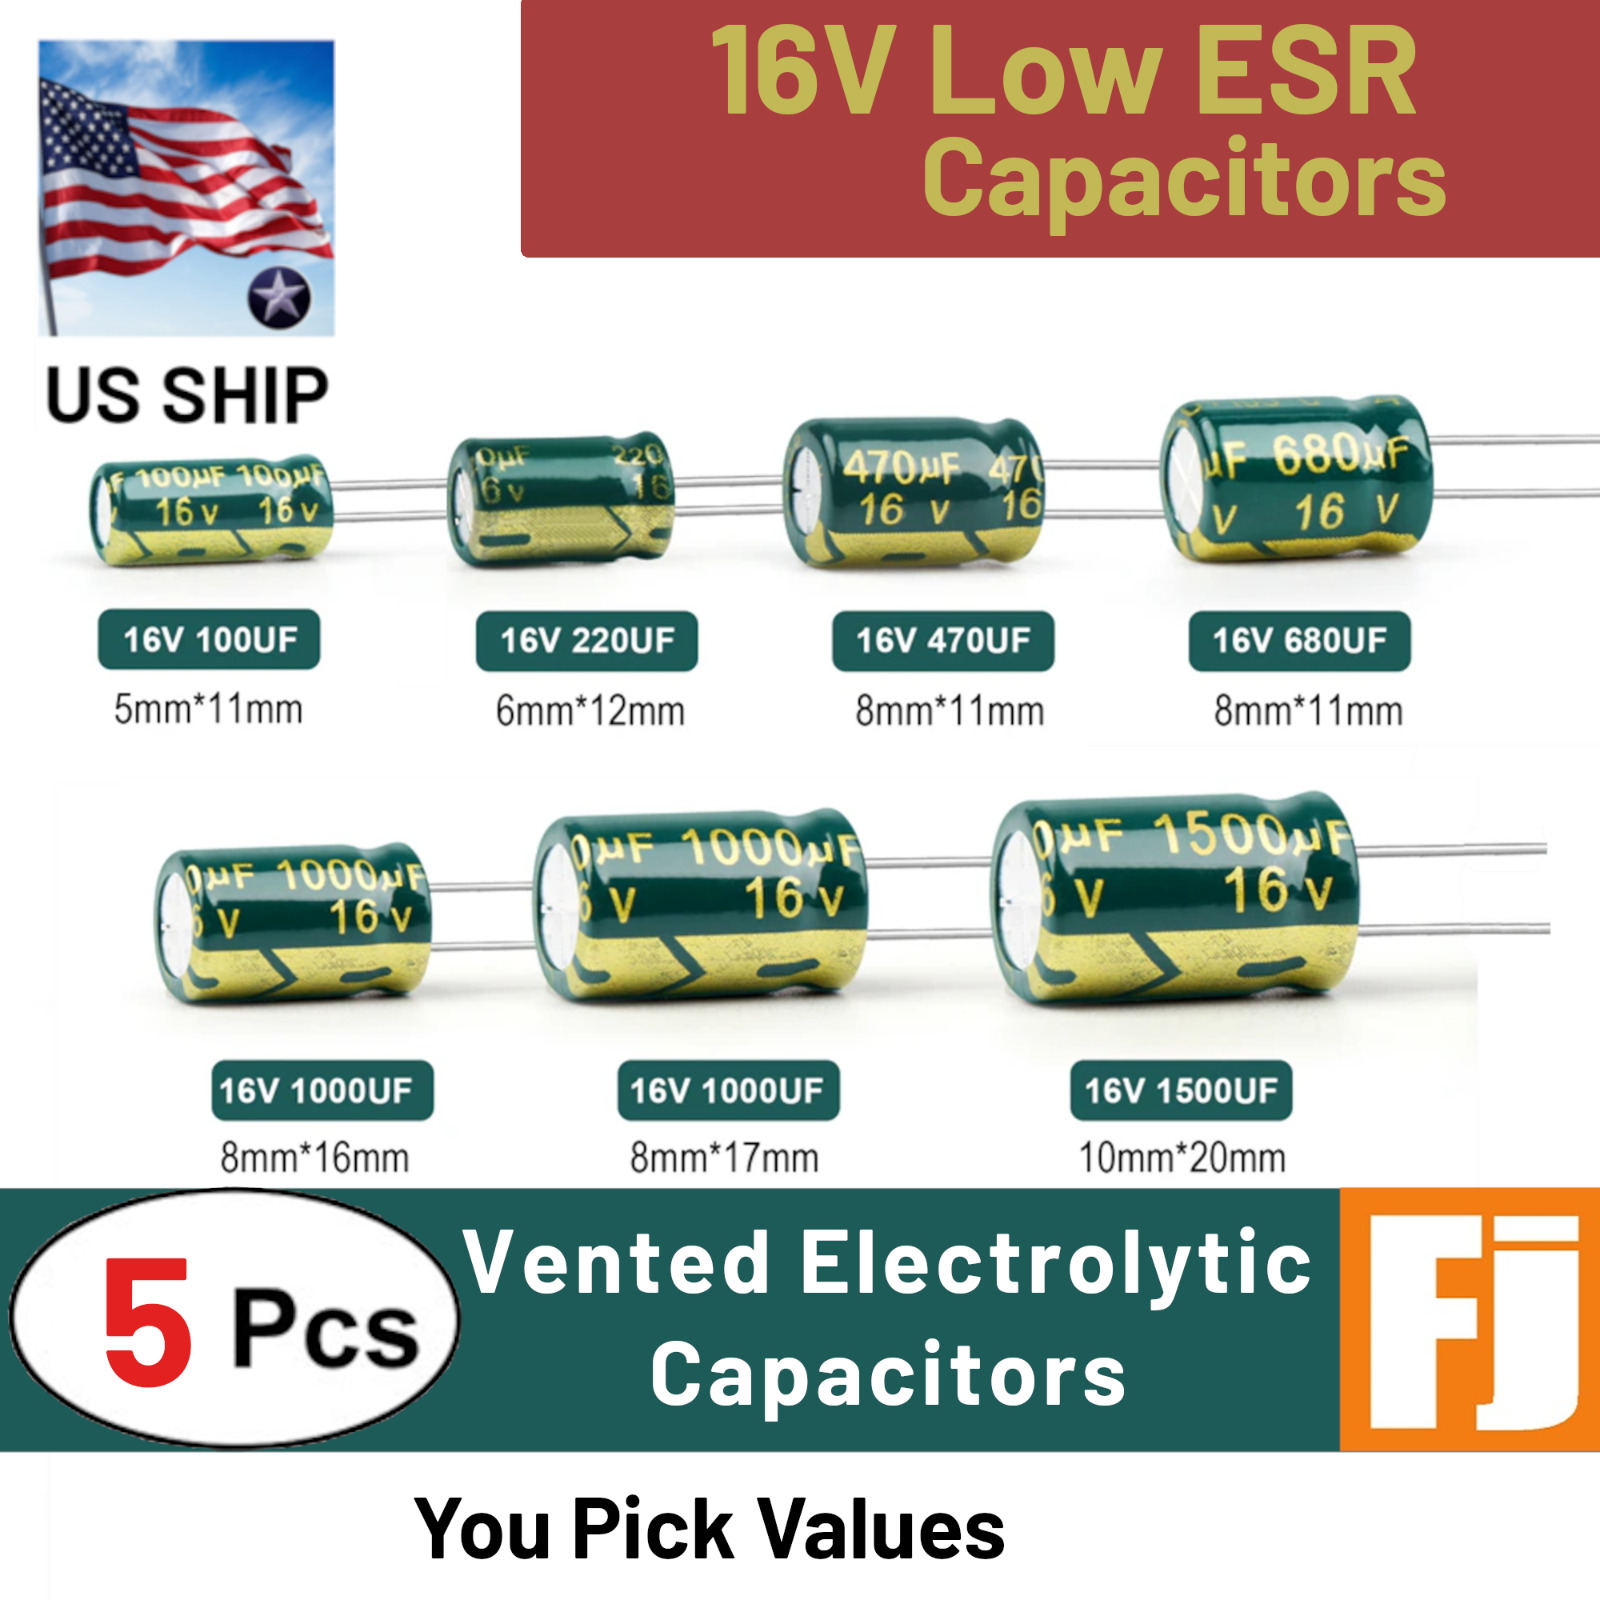 5 Pcs 16V Low ESR High Frequency Electrolytic Capacitors | You Pick | US Ship